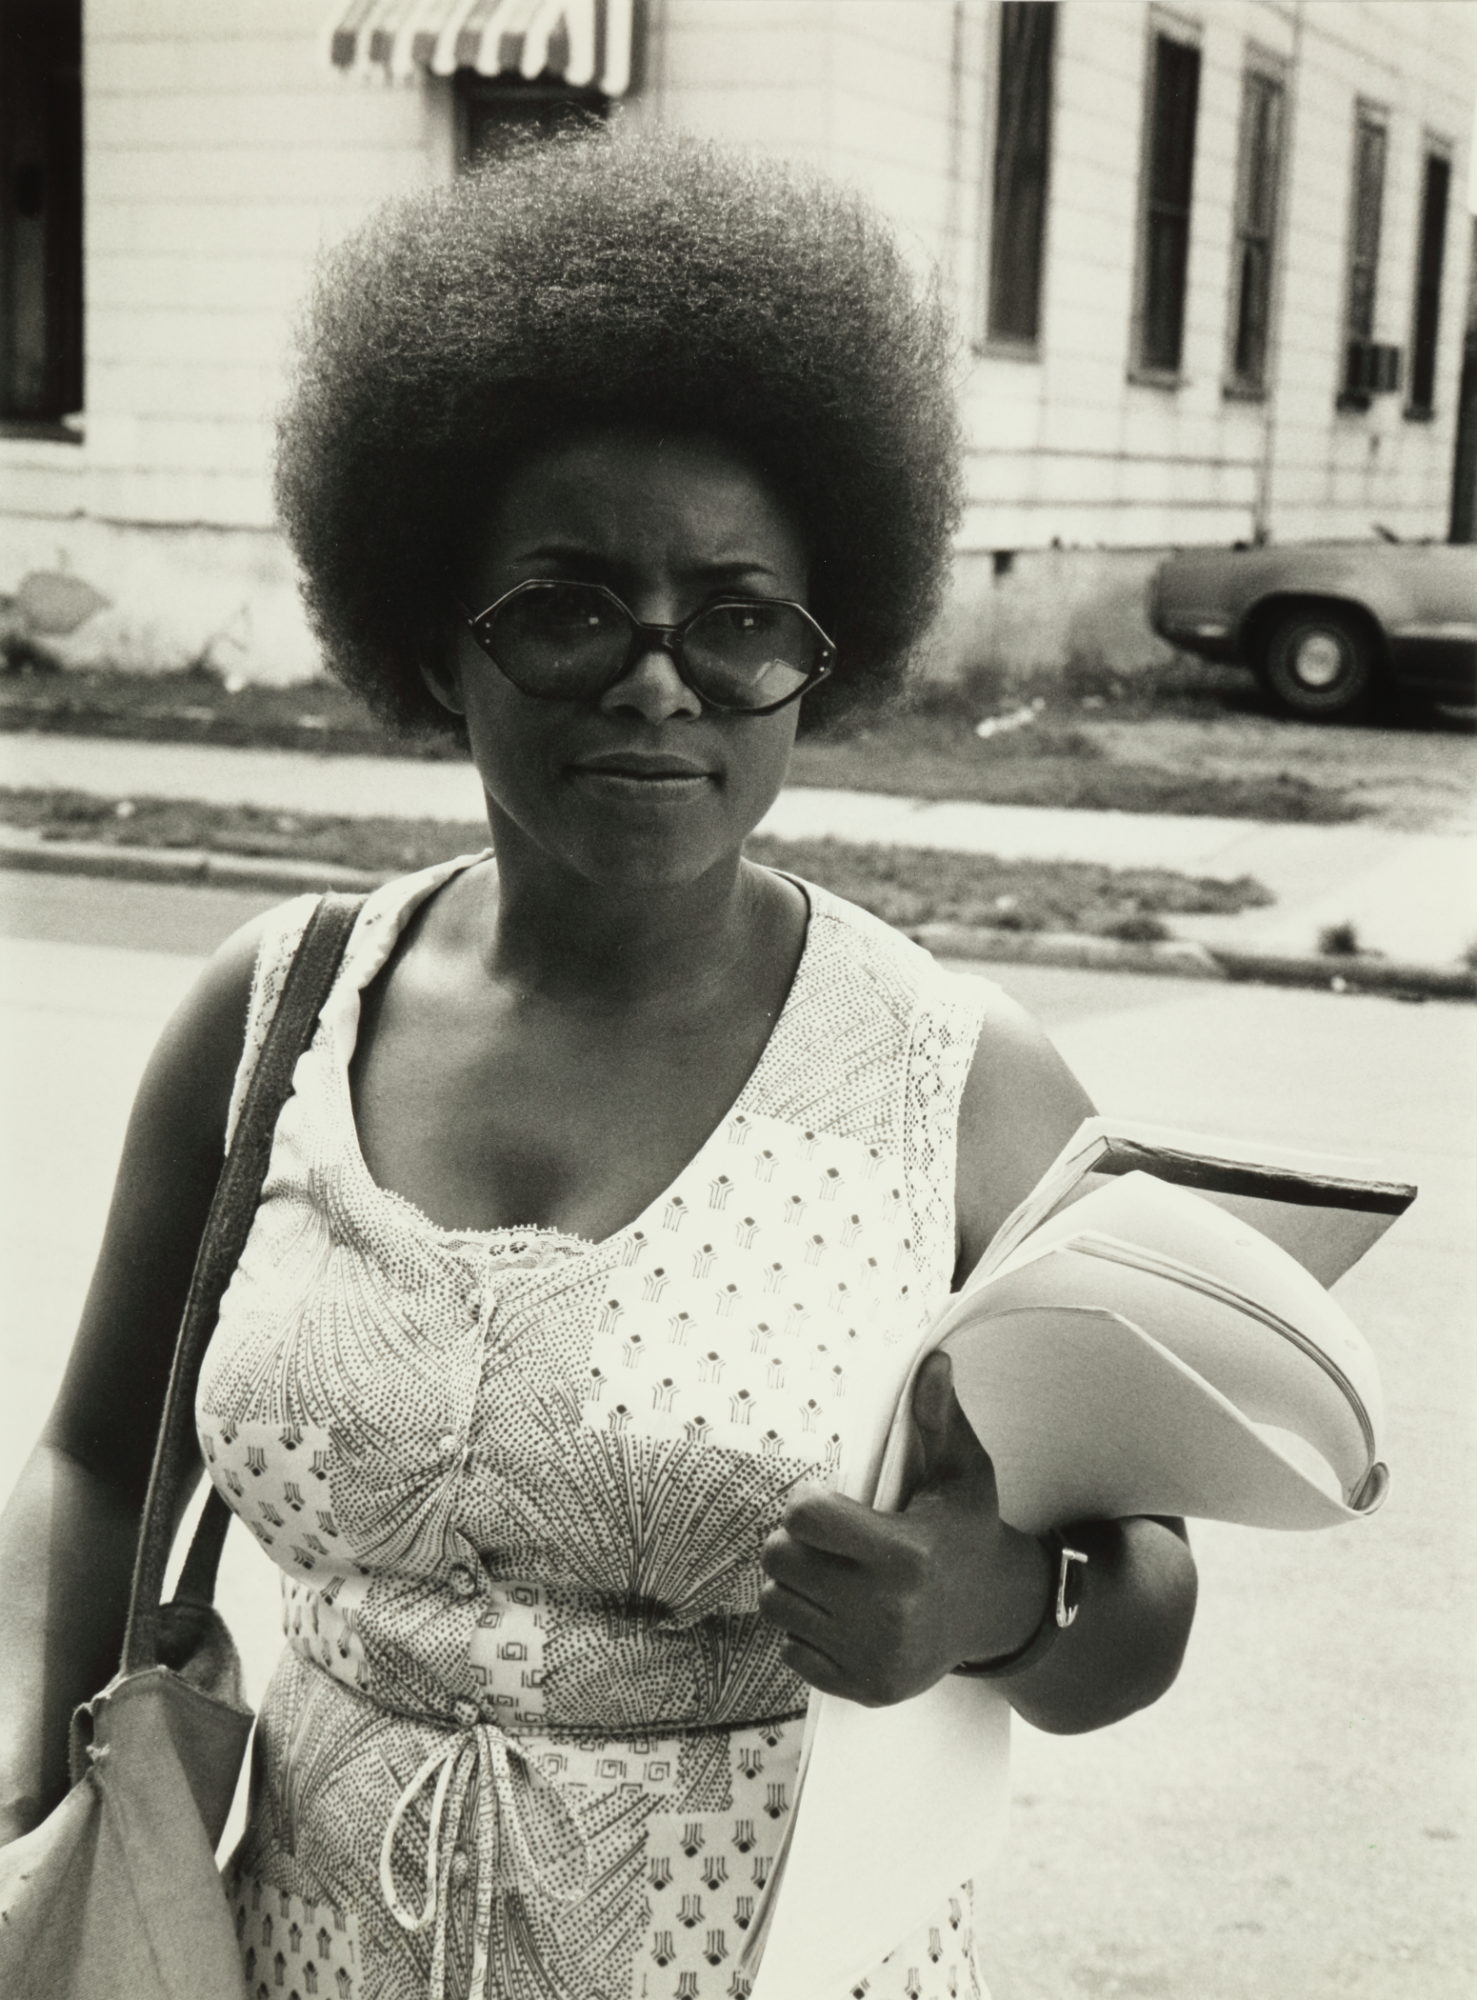 A black and white photograph of a civil rights attorney who is a Black woman with an Afro looking right at the camera and carrying papers in her arms.